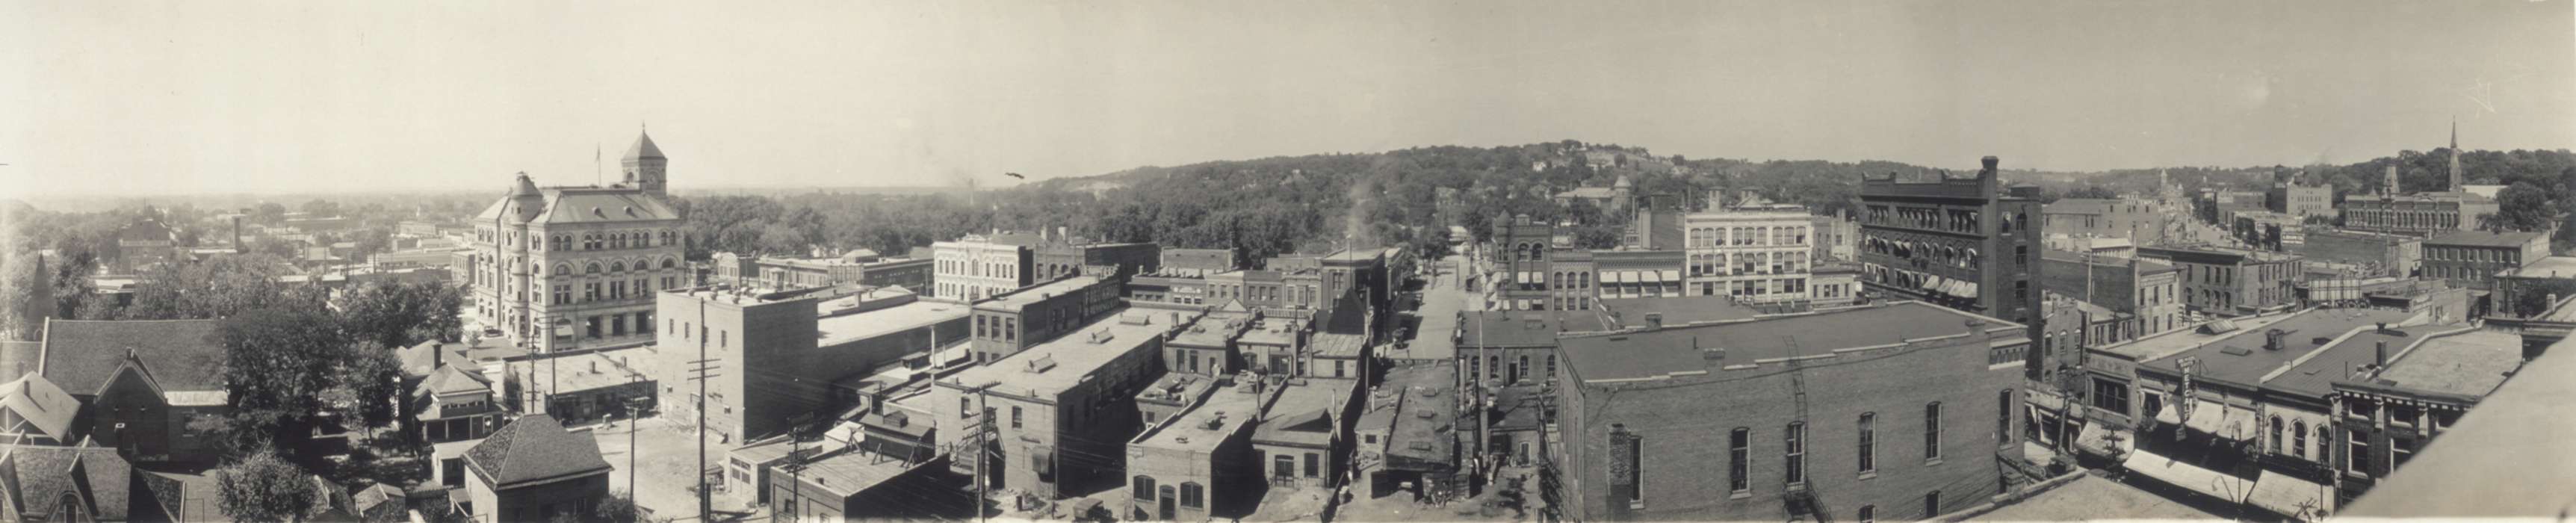 panorama, Iowa History, mainstreet, buildings, Iowa, Library of Congress, Main Streets & Town Squares, Aerial Shots, Cities and Towns, history of Iowa